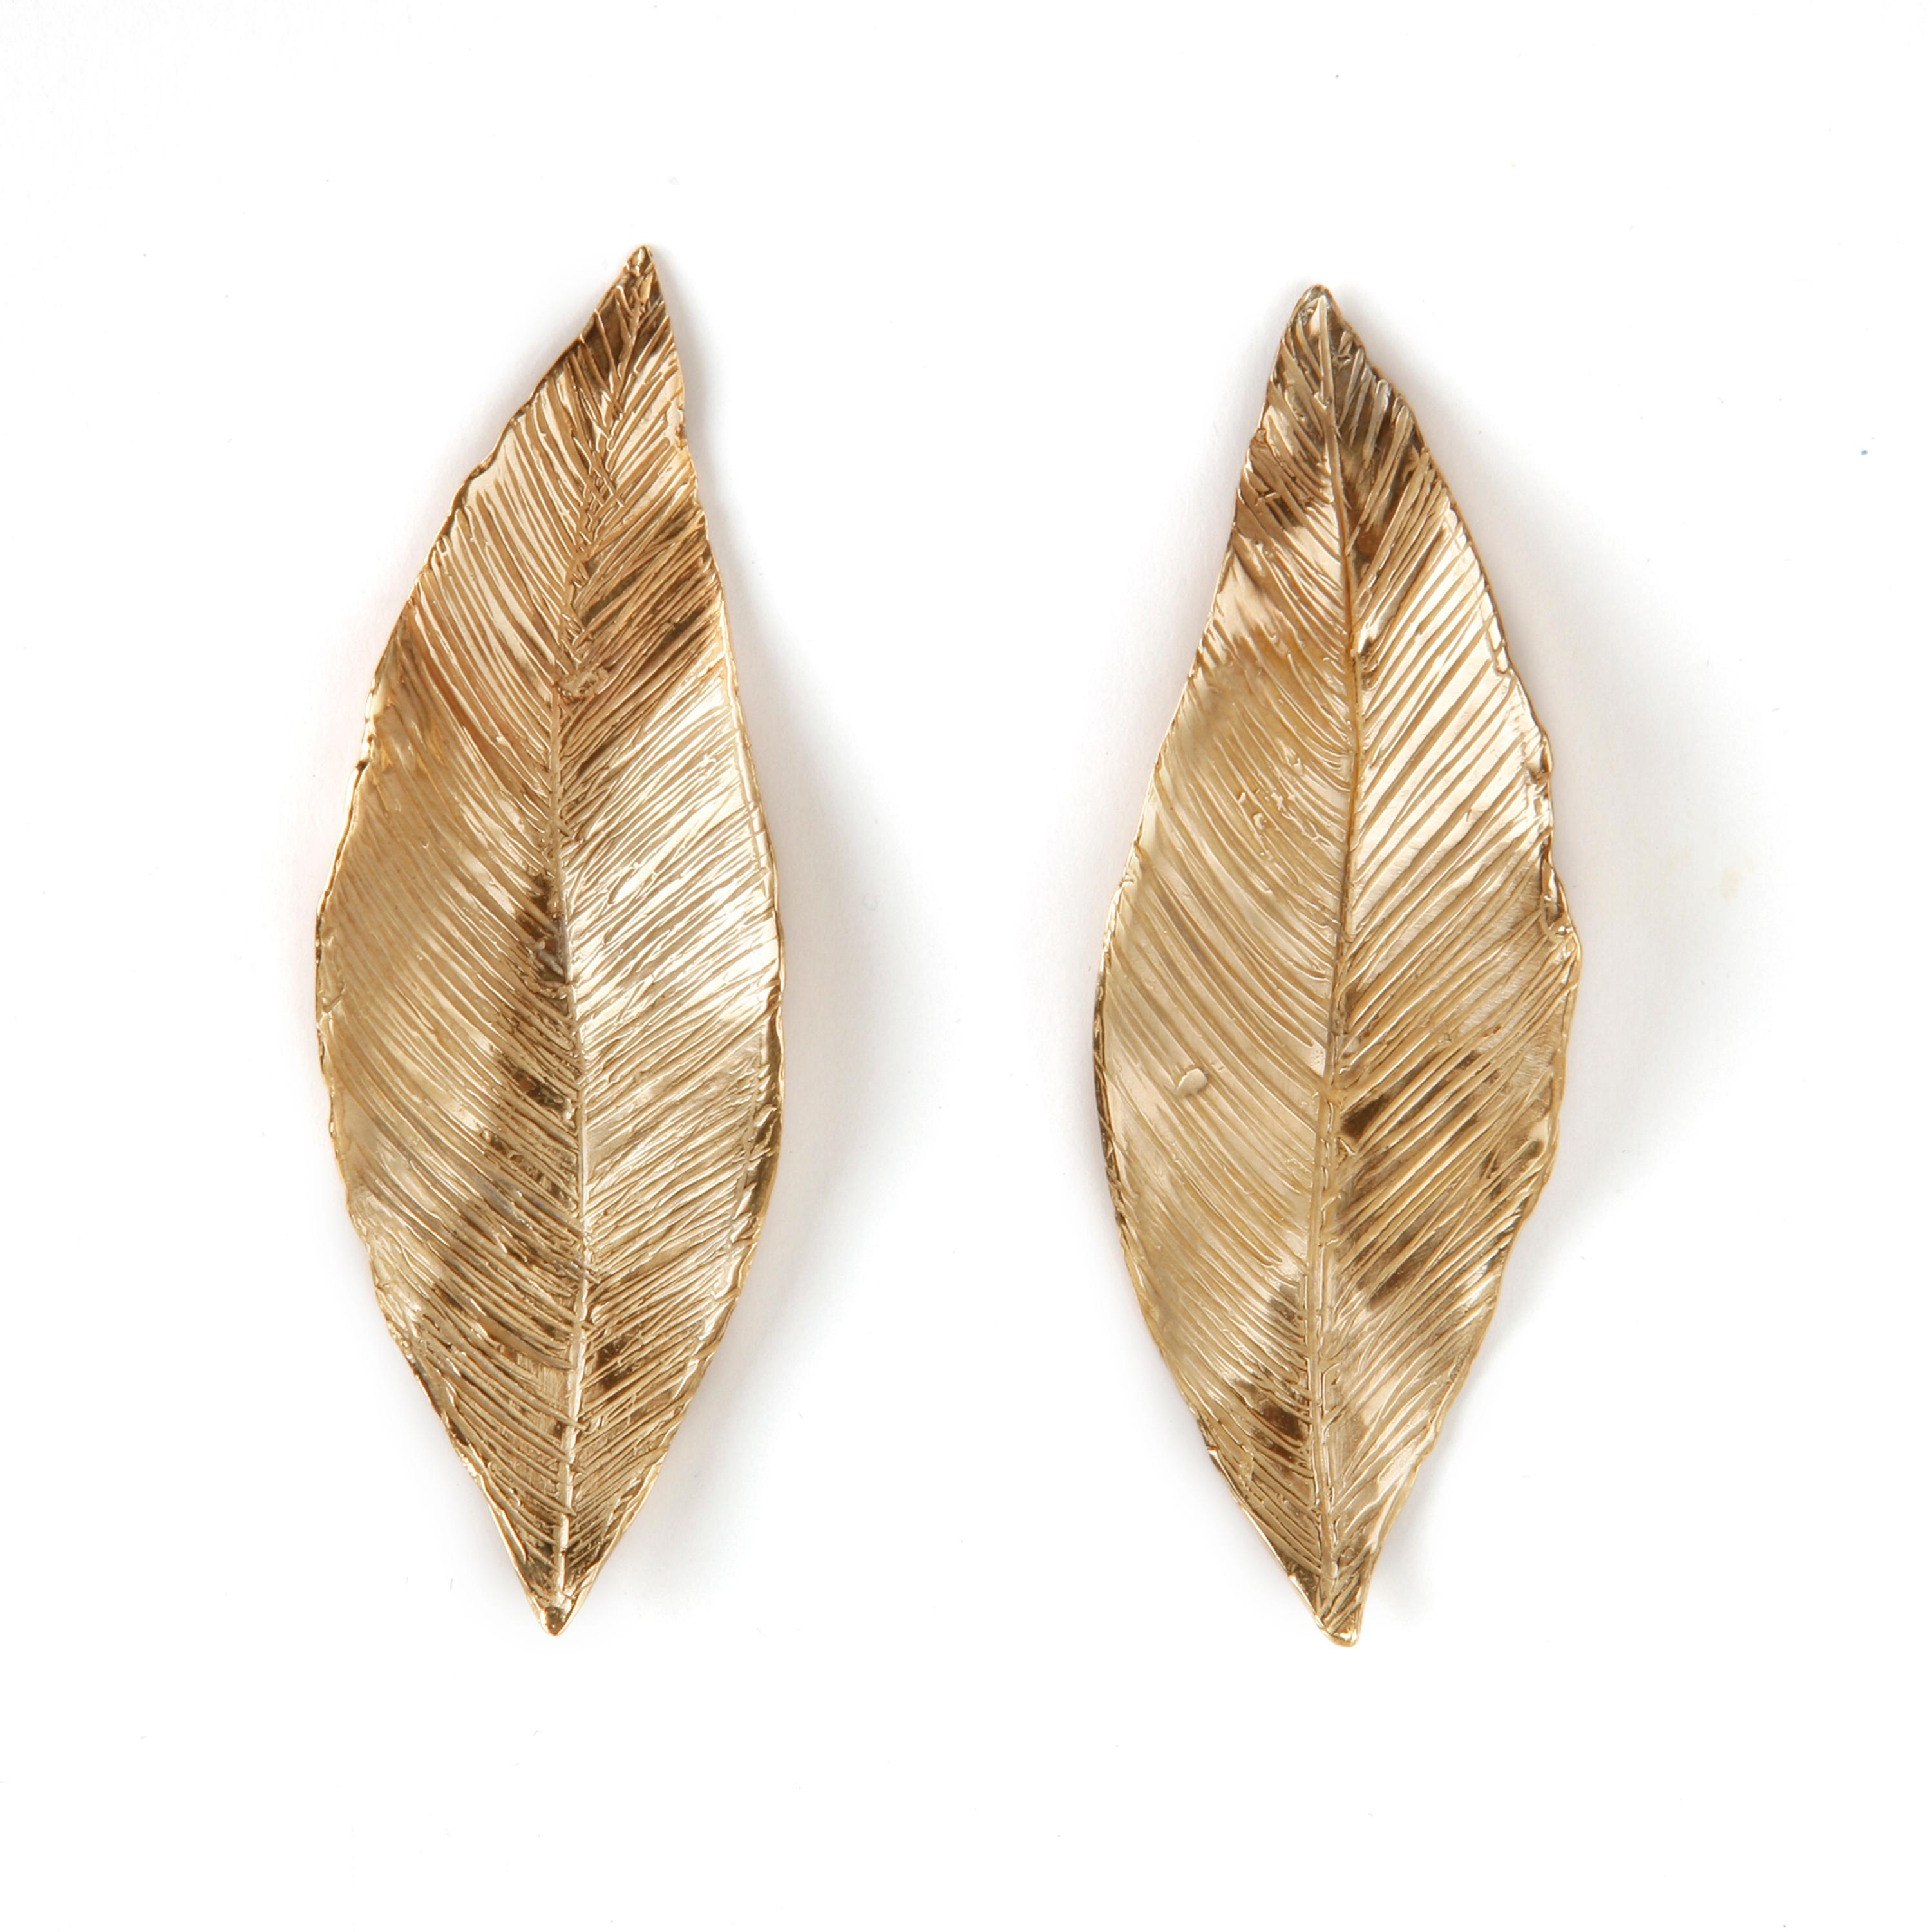 Giulia Barela Leaves Medium Earrings, 24k gold plated bronze In Excellent Condition For Sale In Rome, IT